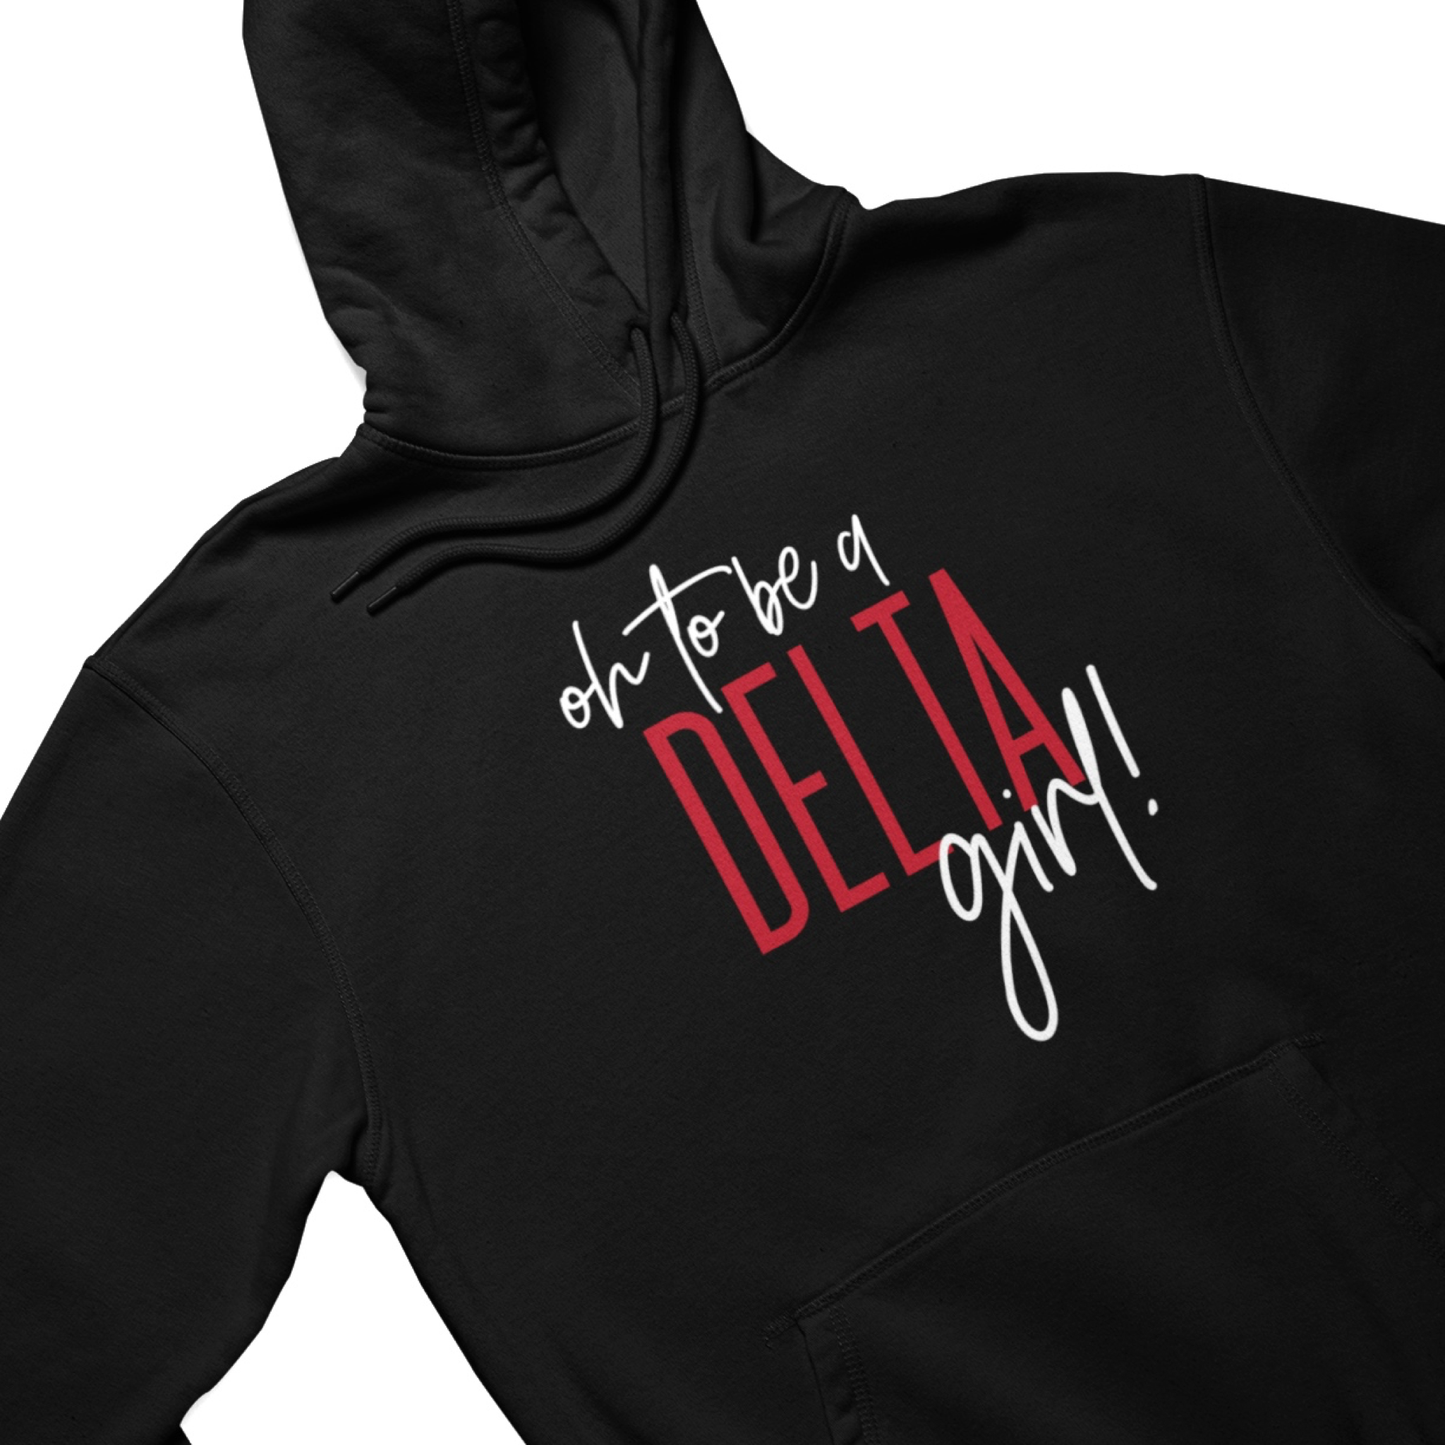 Oh To Be A Delta Girl | Black Hoodie